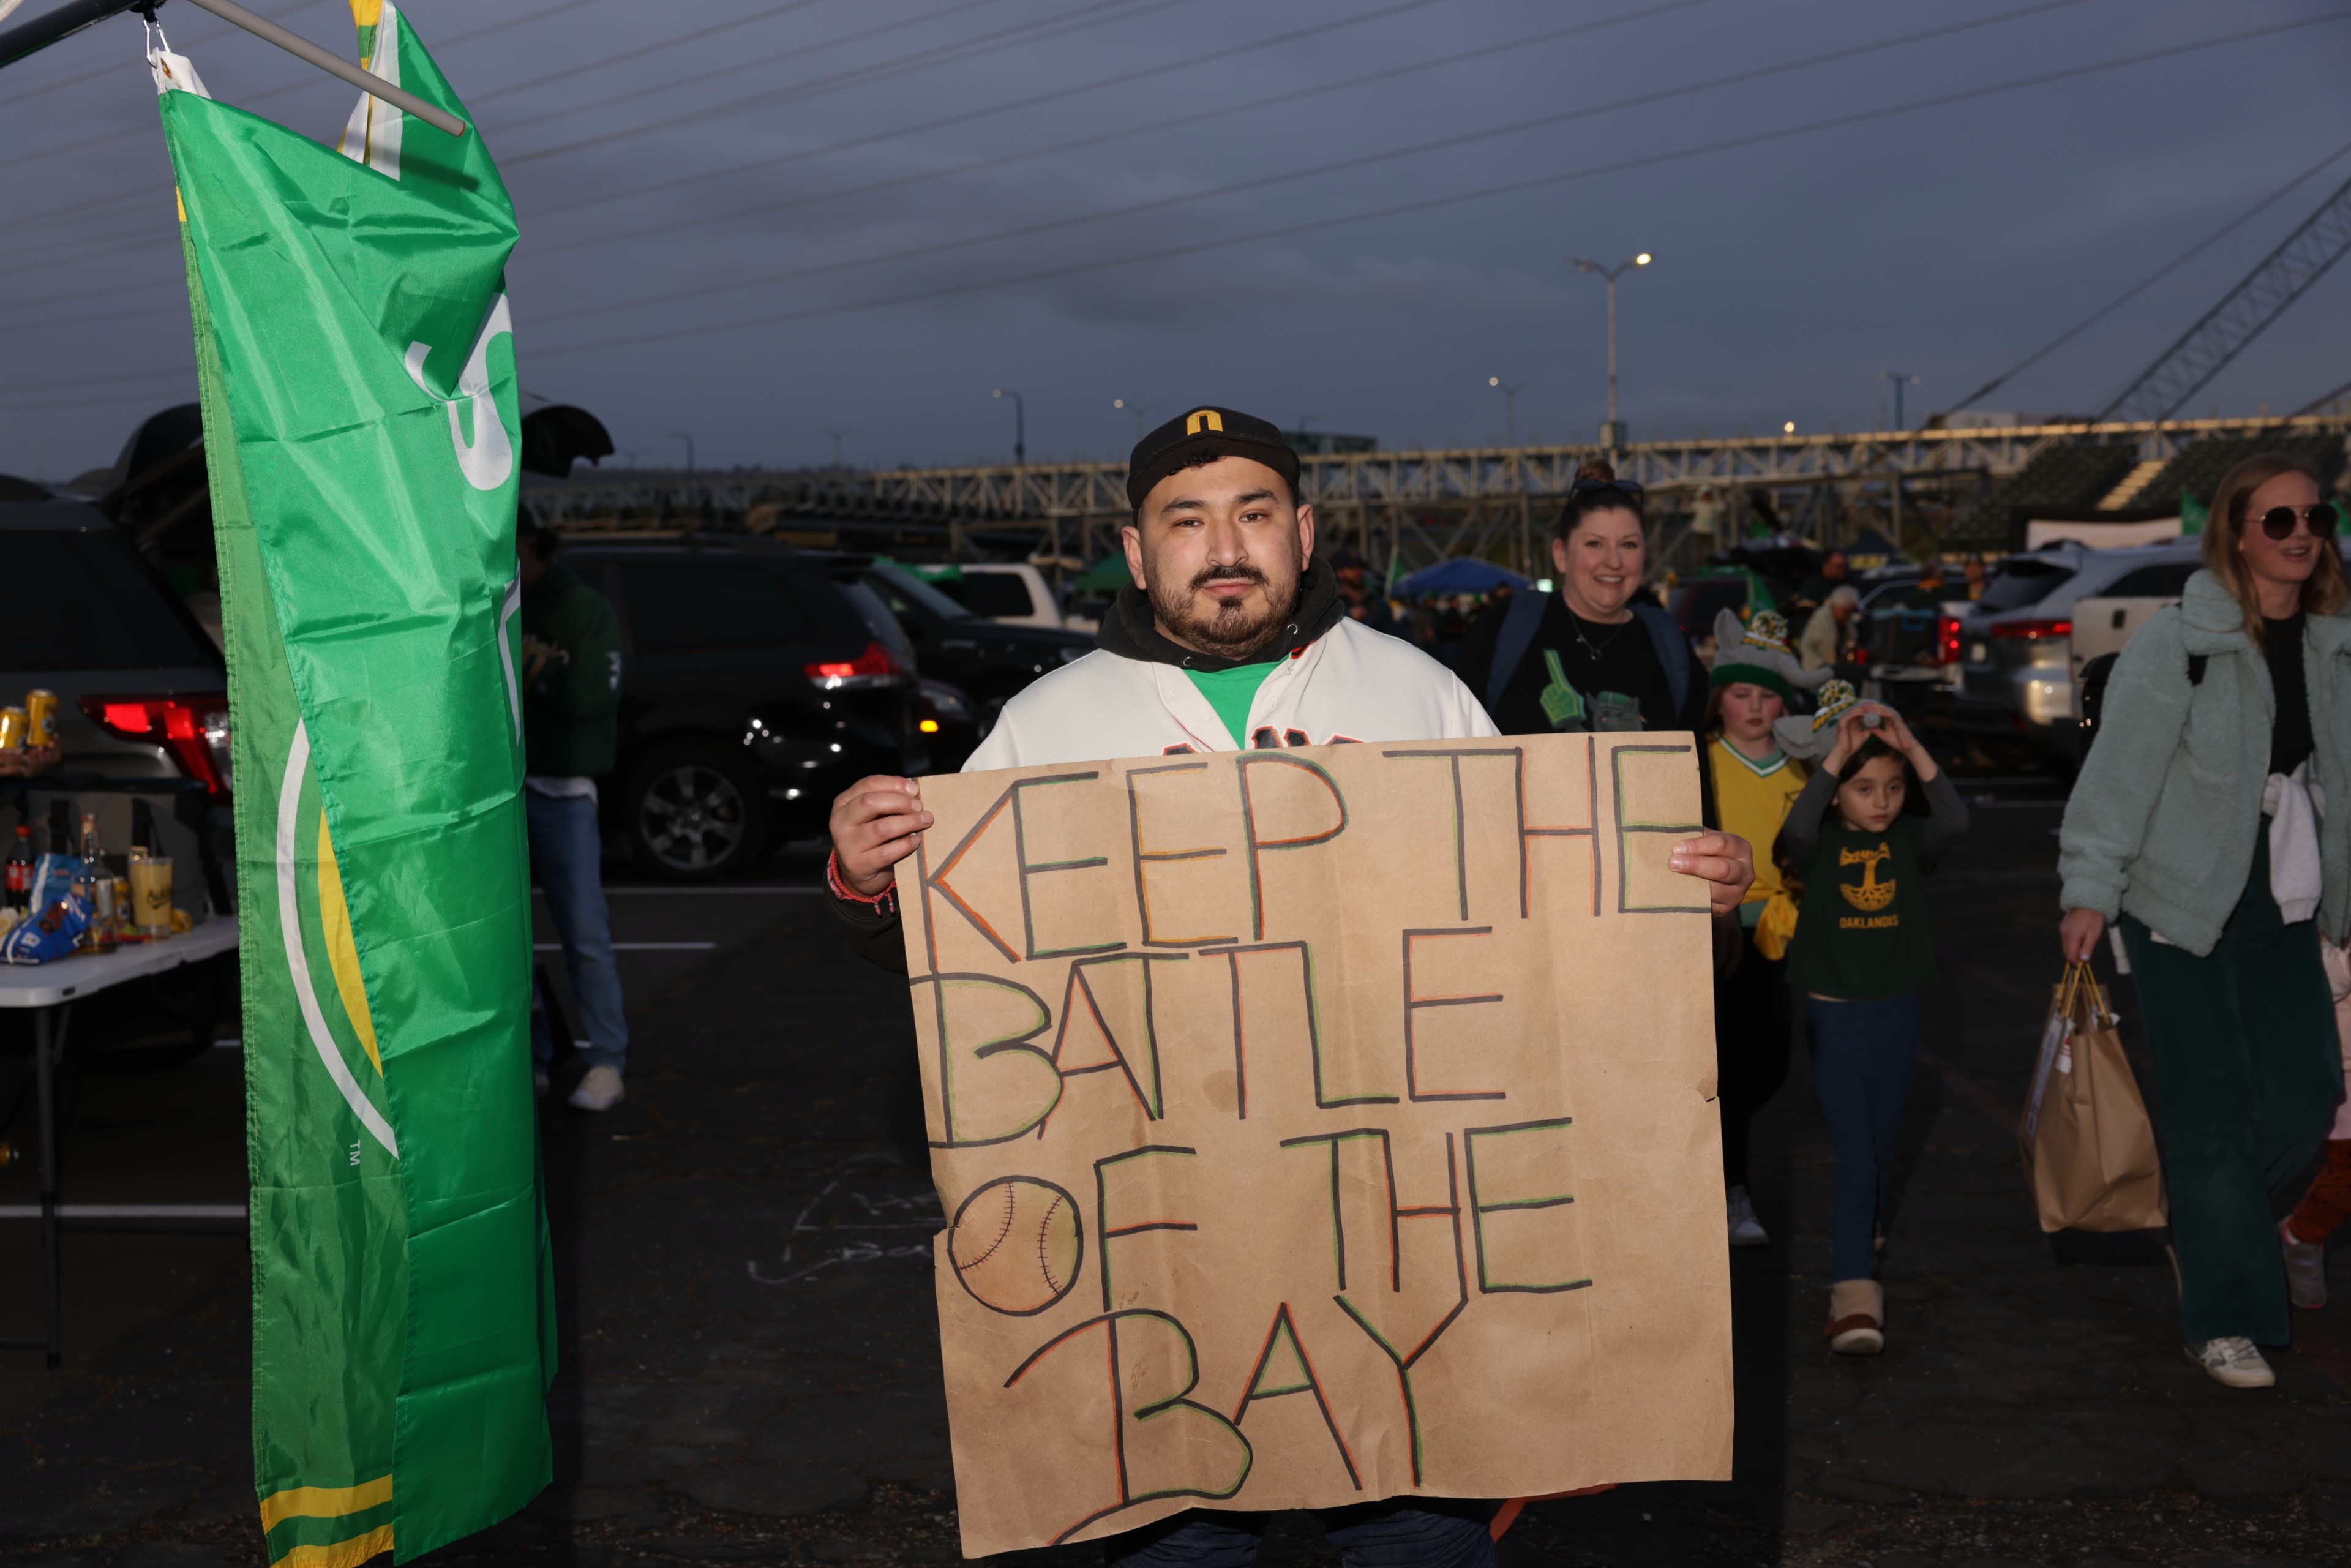 A man holds a sign &quot;KEEP THE BATTLE OF THE BAY&quot; at a sports event tailgate with others in team colors.